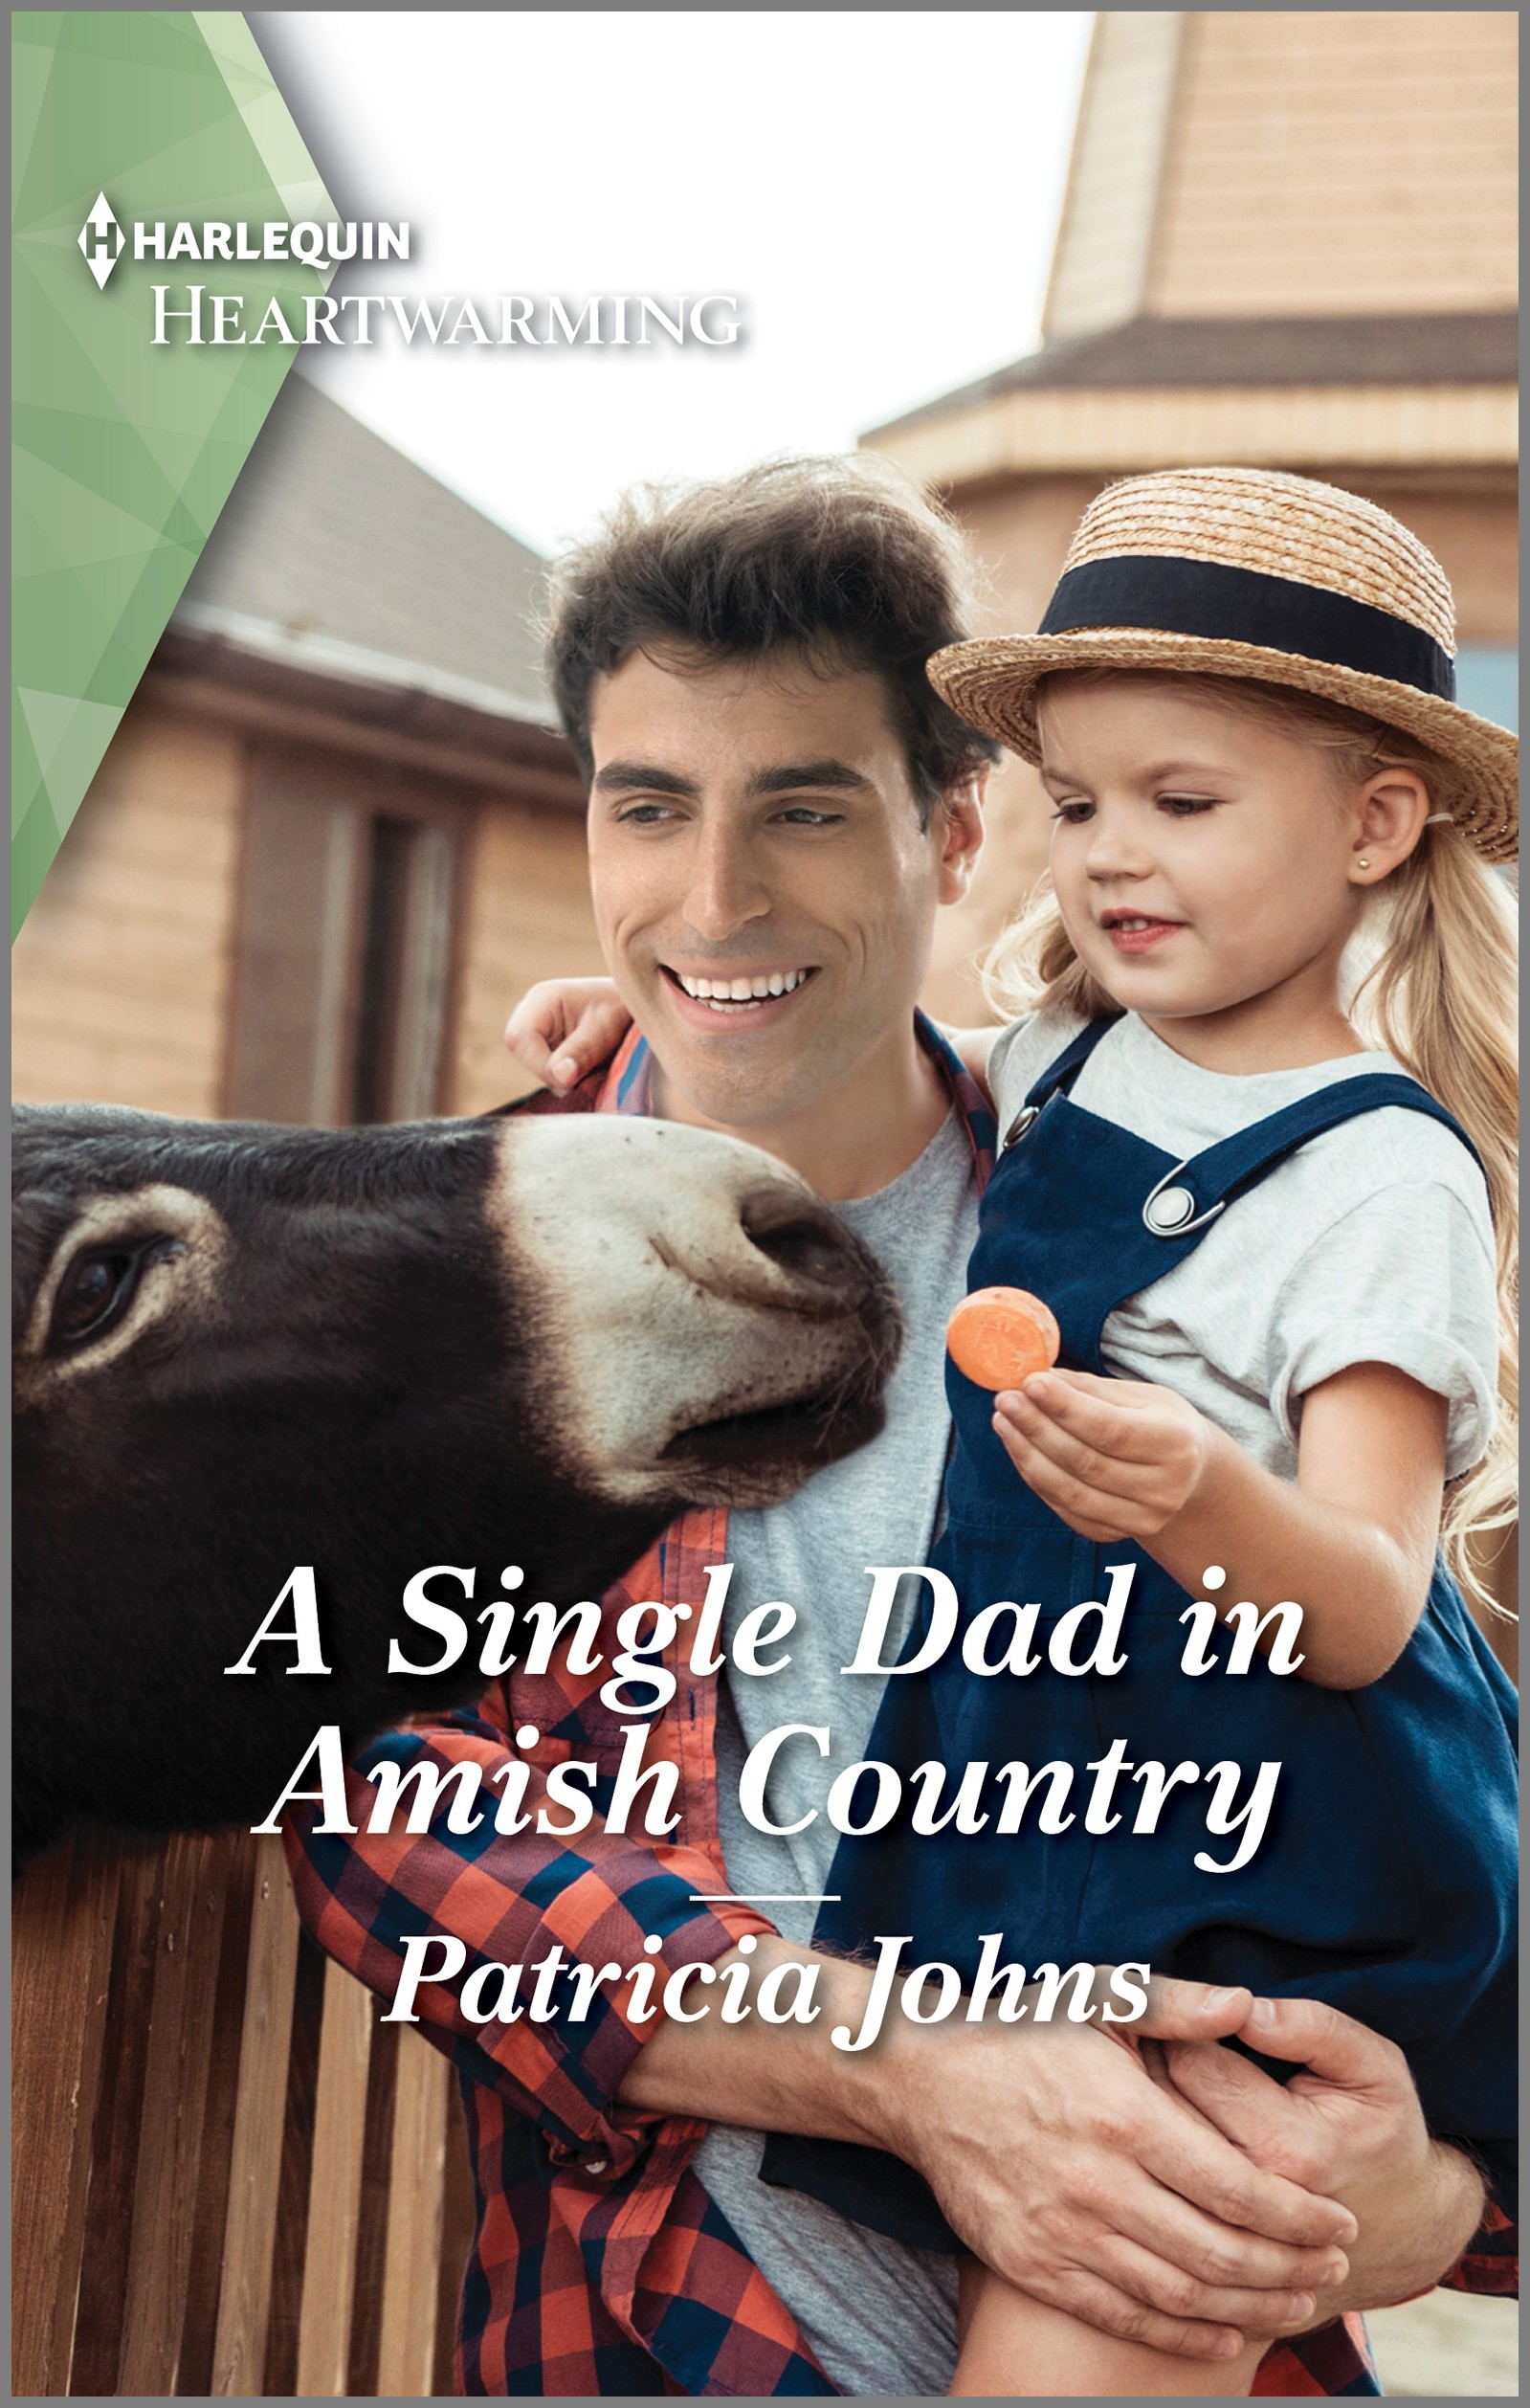 Cover image for A SINGLE DAD IN AMISH COUNTRY by Patricia Johns, featuring a man holding a little girl in his arms. The girl is feeding an orange slice to a donkey